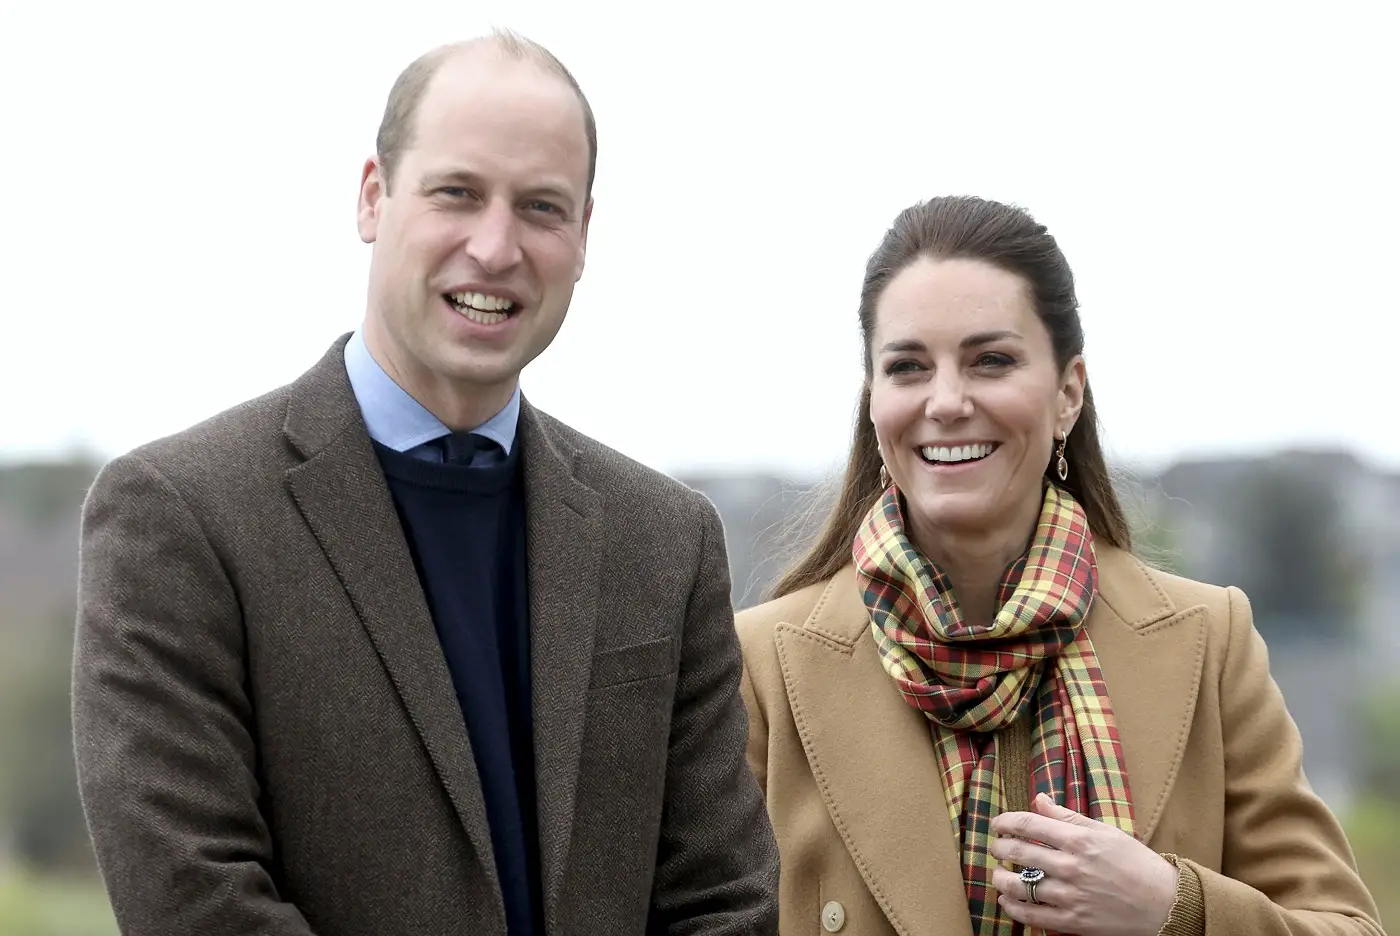 The Duke and Duchess of Cambridge in Orkney - Royal Visit Scotland